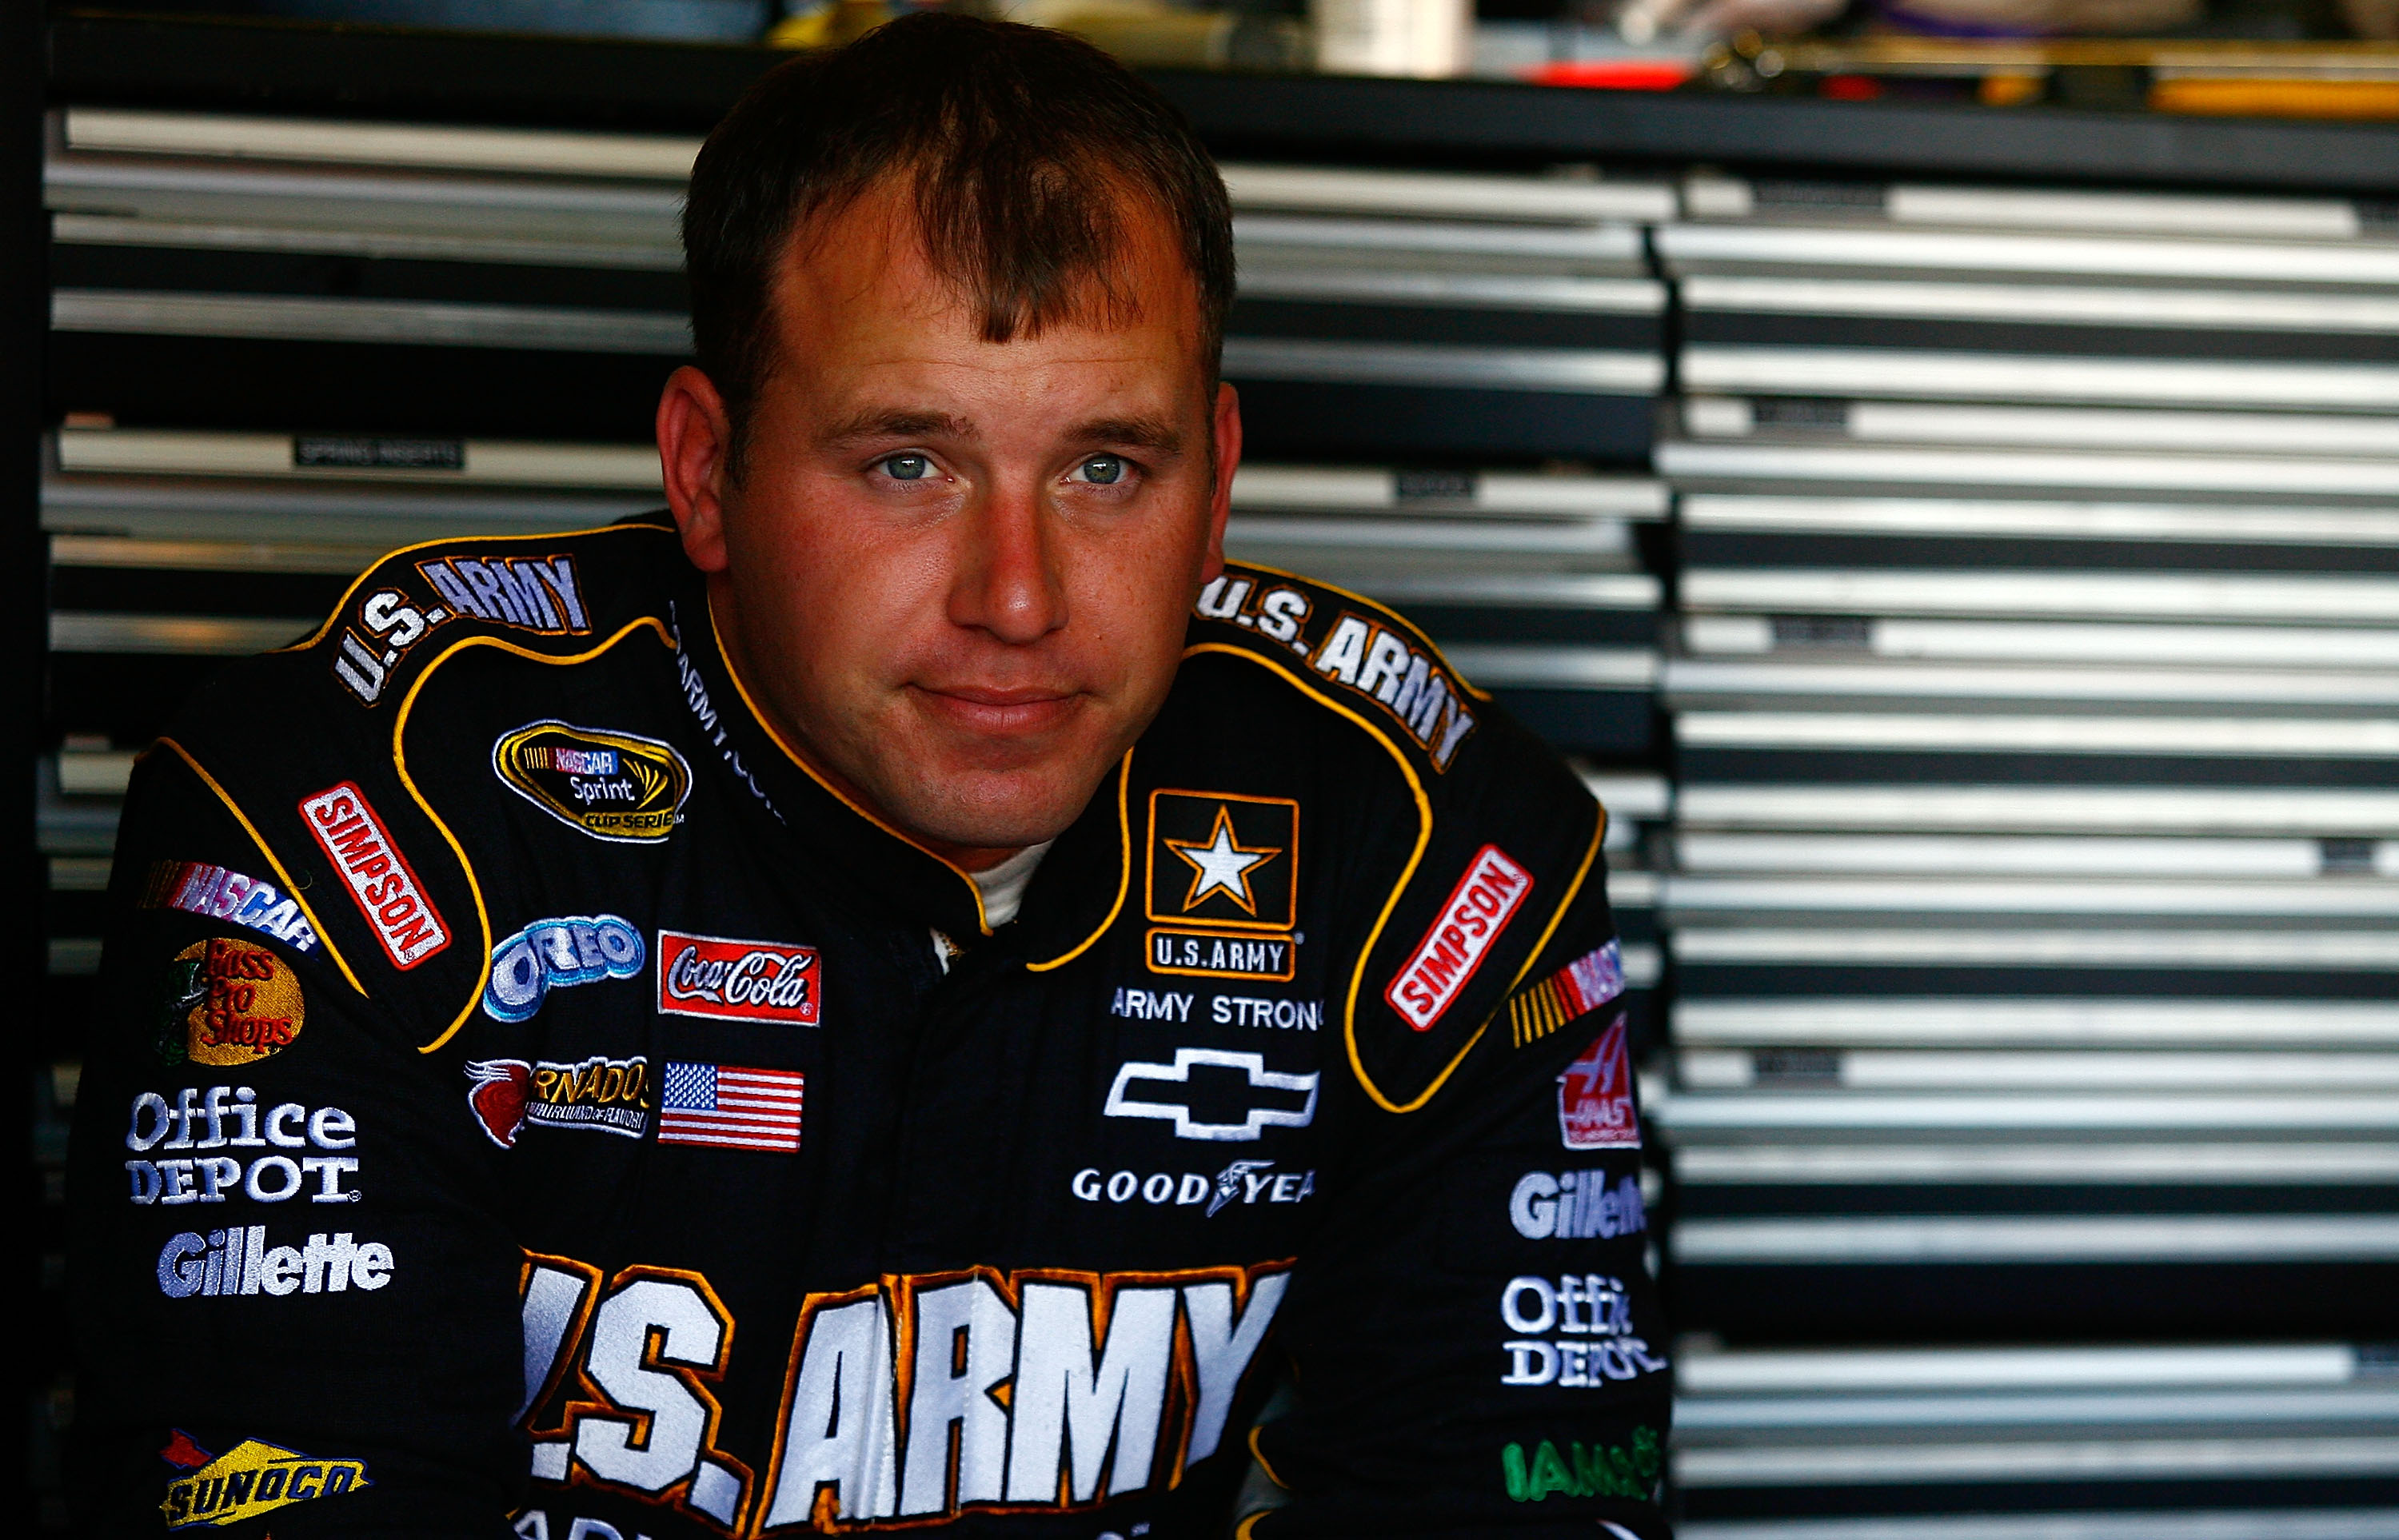 AVONDALE, AZ - NOVEMBER 13:  Ryan Newman, driver of the #39 U.S. ARMY Chevrolet sits in the garage area during practice for the NASCAR Sprint Cup Series Kobalt Tools 500 at Phoenix International Raceway on November 13, 2010 in Avondale, Arizona.  (Photo b